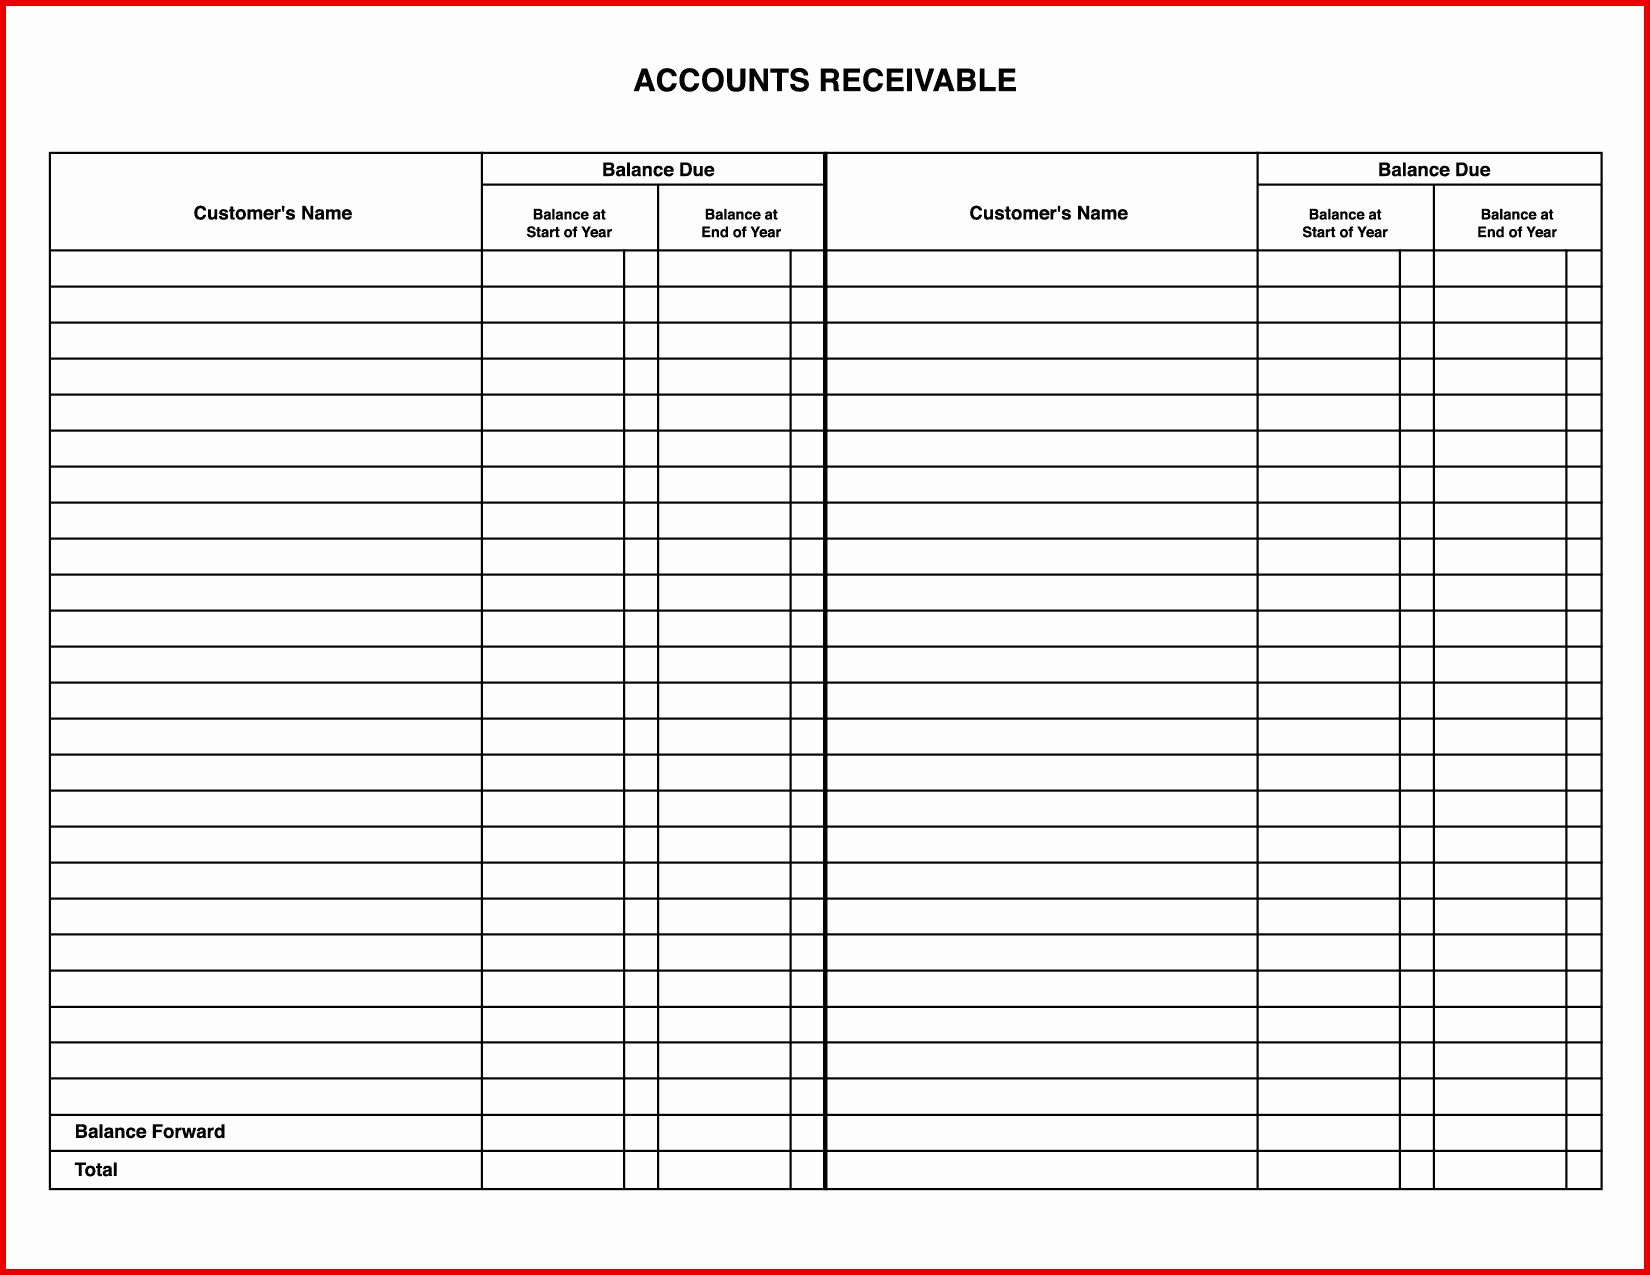 probate-accounting-template-excel-beautiful-probate-accounting-within